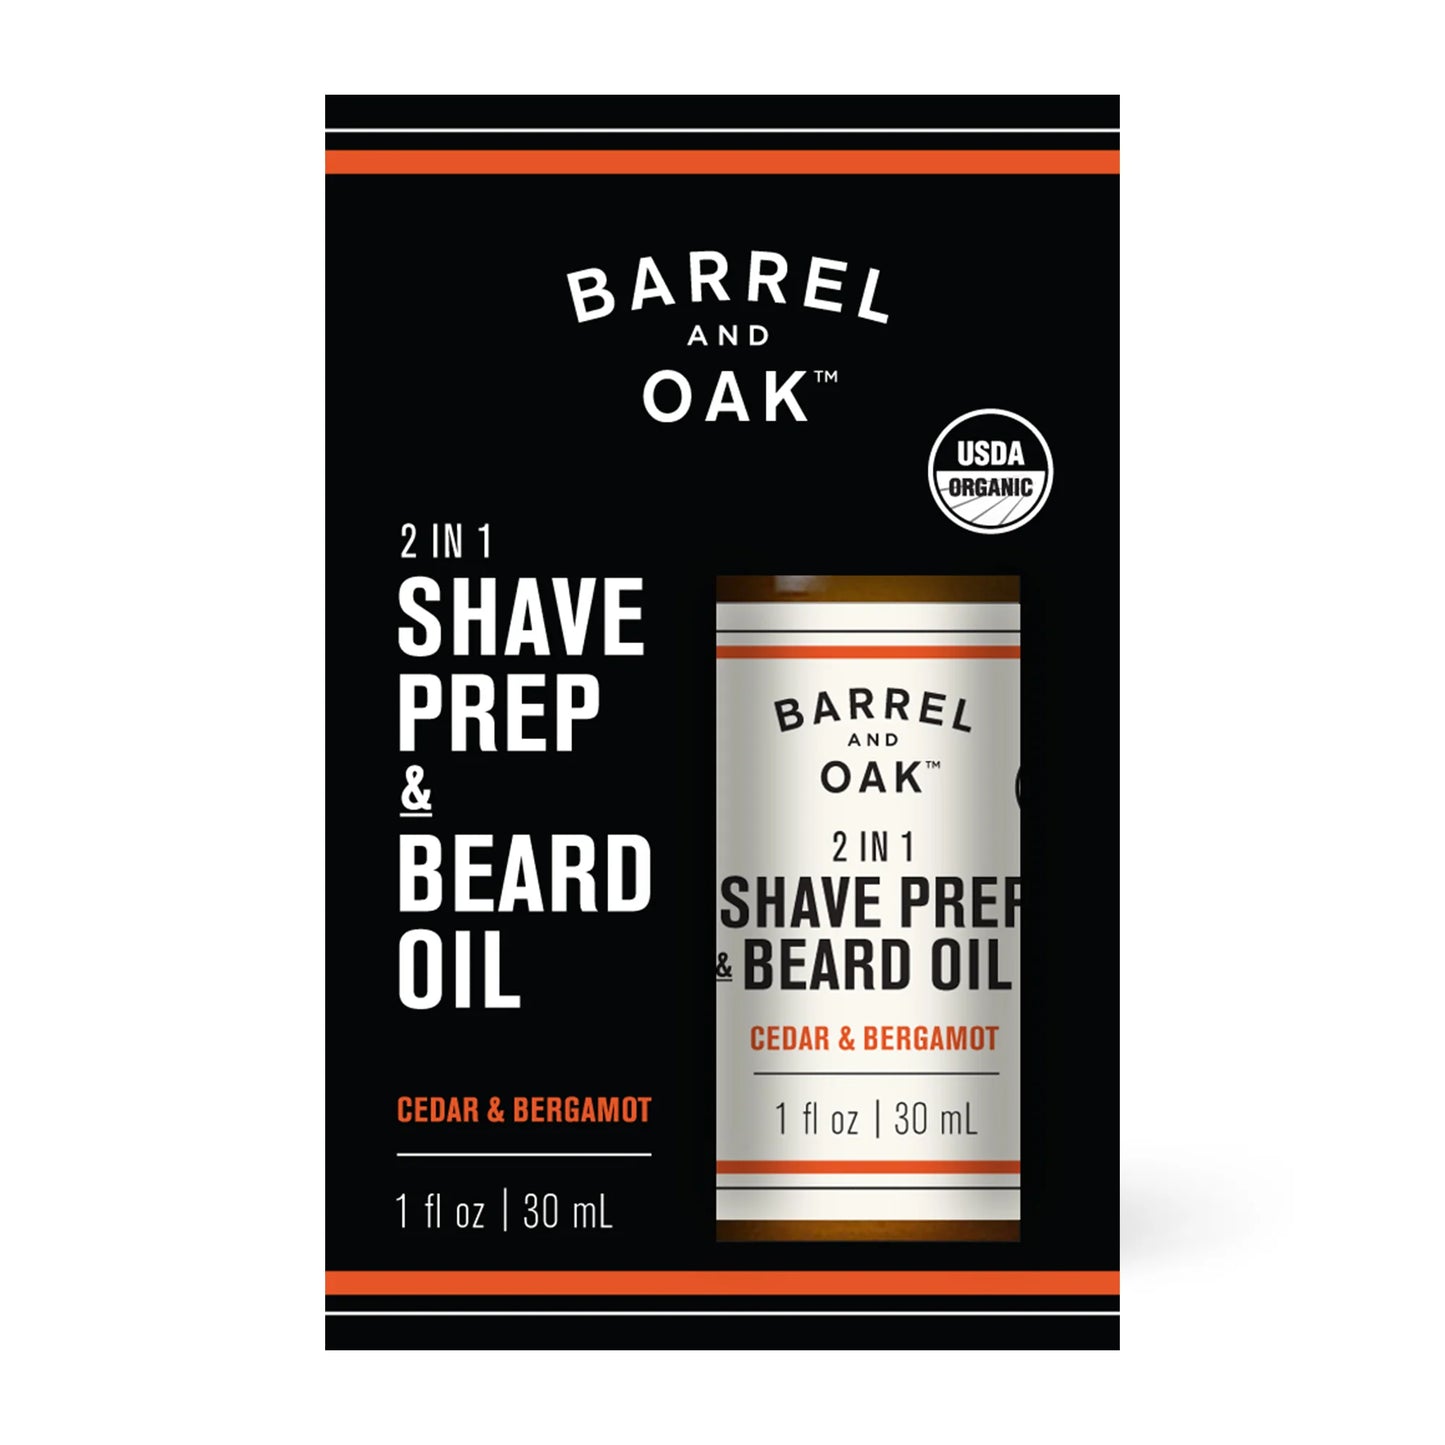 2 in 1 Shave Prep and Beard Oil